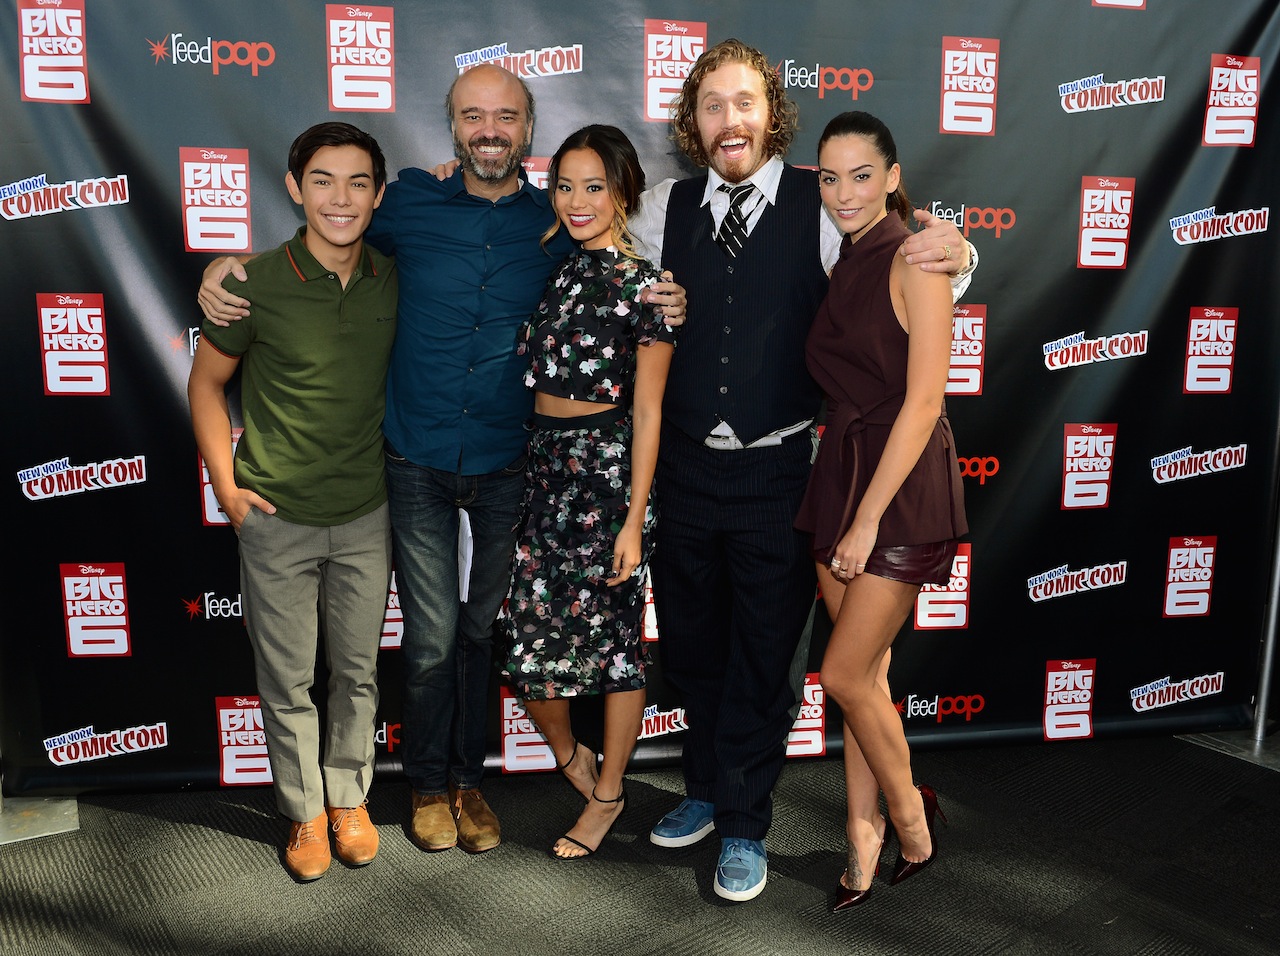 NEW YORK, NY - OCTOBER 09:  (L-R) Actors Ryan Potter, Scott Adsit, Jamie Chung, TJ Miller, and Genesis Rodriguez attend Walt Disney Studios' 2014 New York Comic Con presentations of "Big Hero 6" and "Tomorrowland" at the Javits Convention Center on Thursday October 9, 2014 in New York City.  (Photo by Stephen Lovekin/Getty Images for Disney) *** Local Caption *** Ryan Potter;Scott Adsit;Jamie Chung;TJ Miller;Genesis Rodriguez